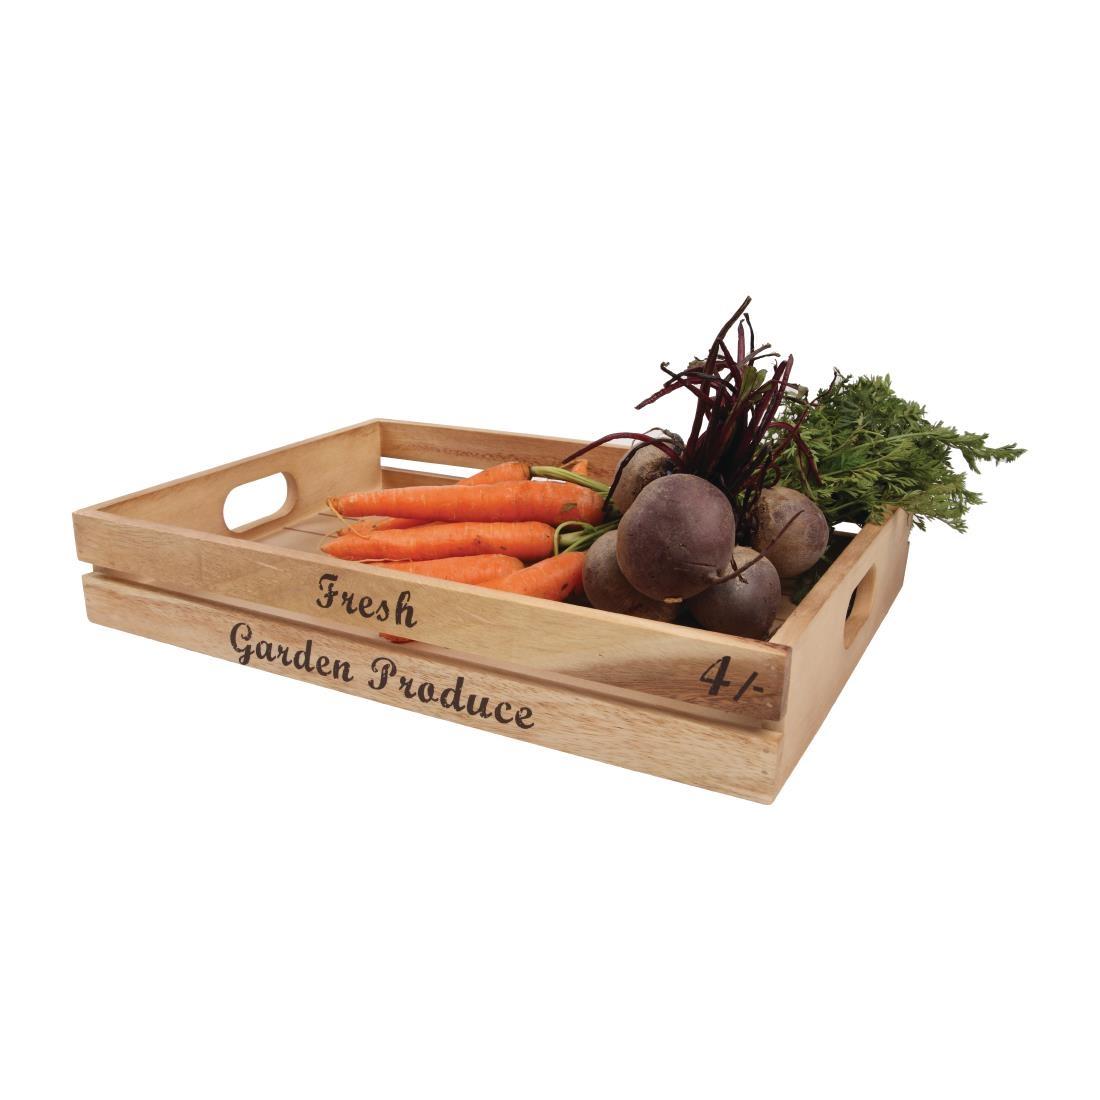 T&G Rustic Wooden Fruit and Veg Crate Large - GL067  - 2